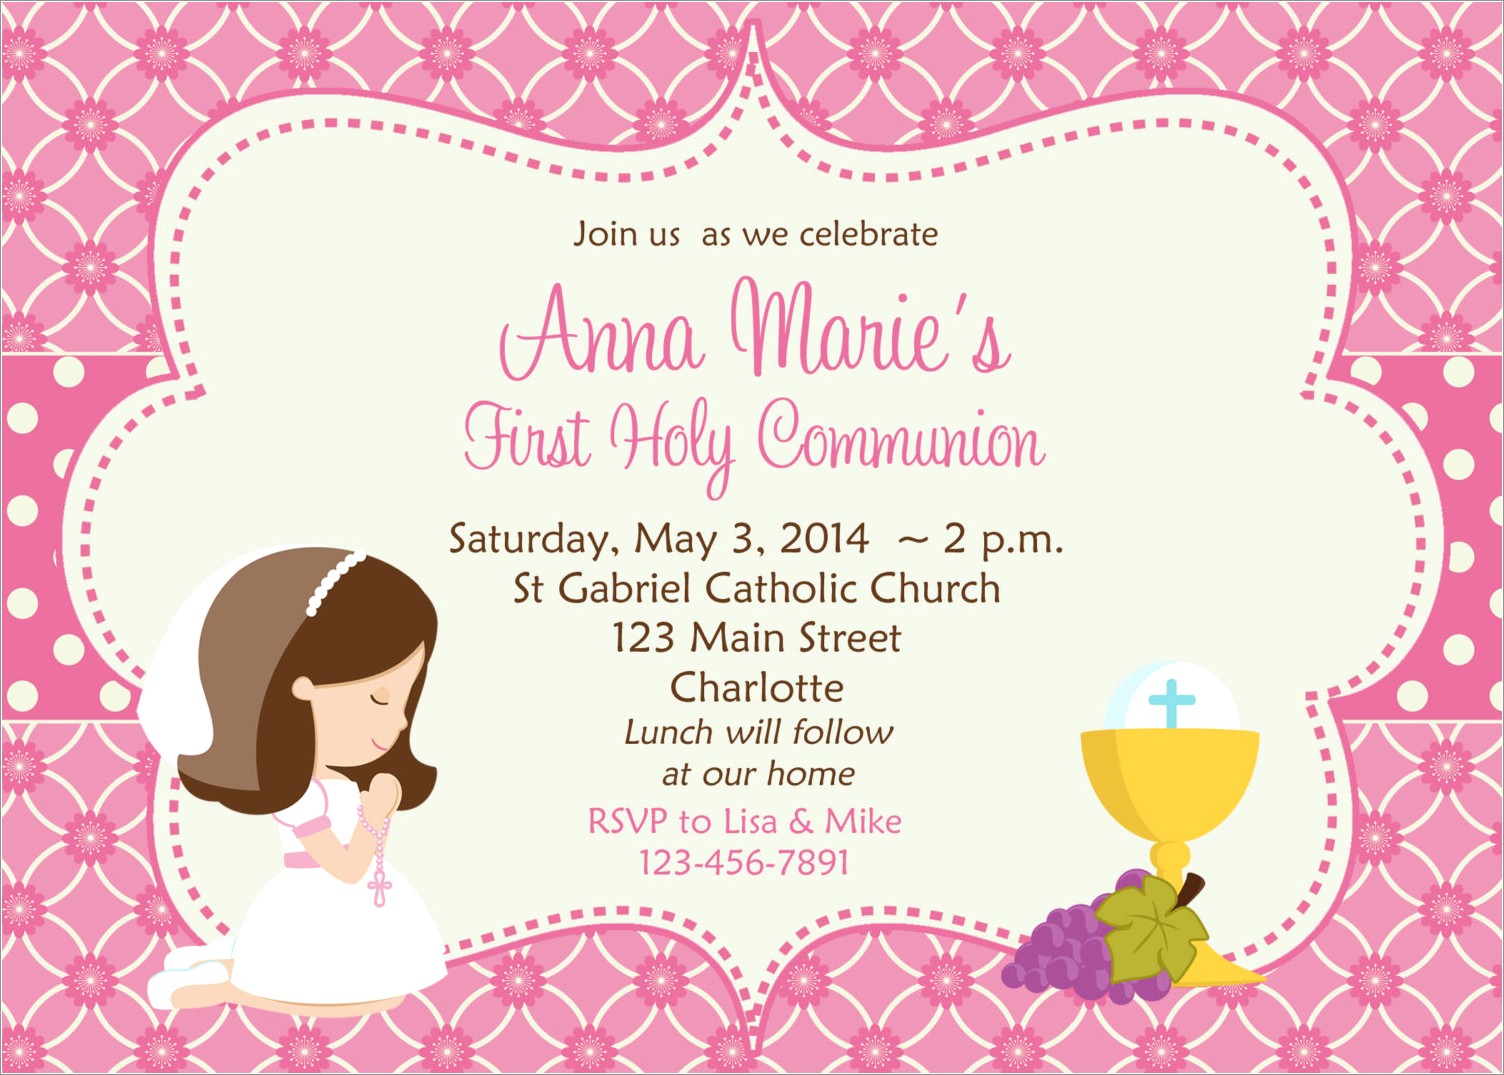 First Holy Communion Invitation Templates